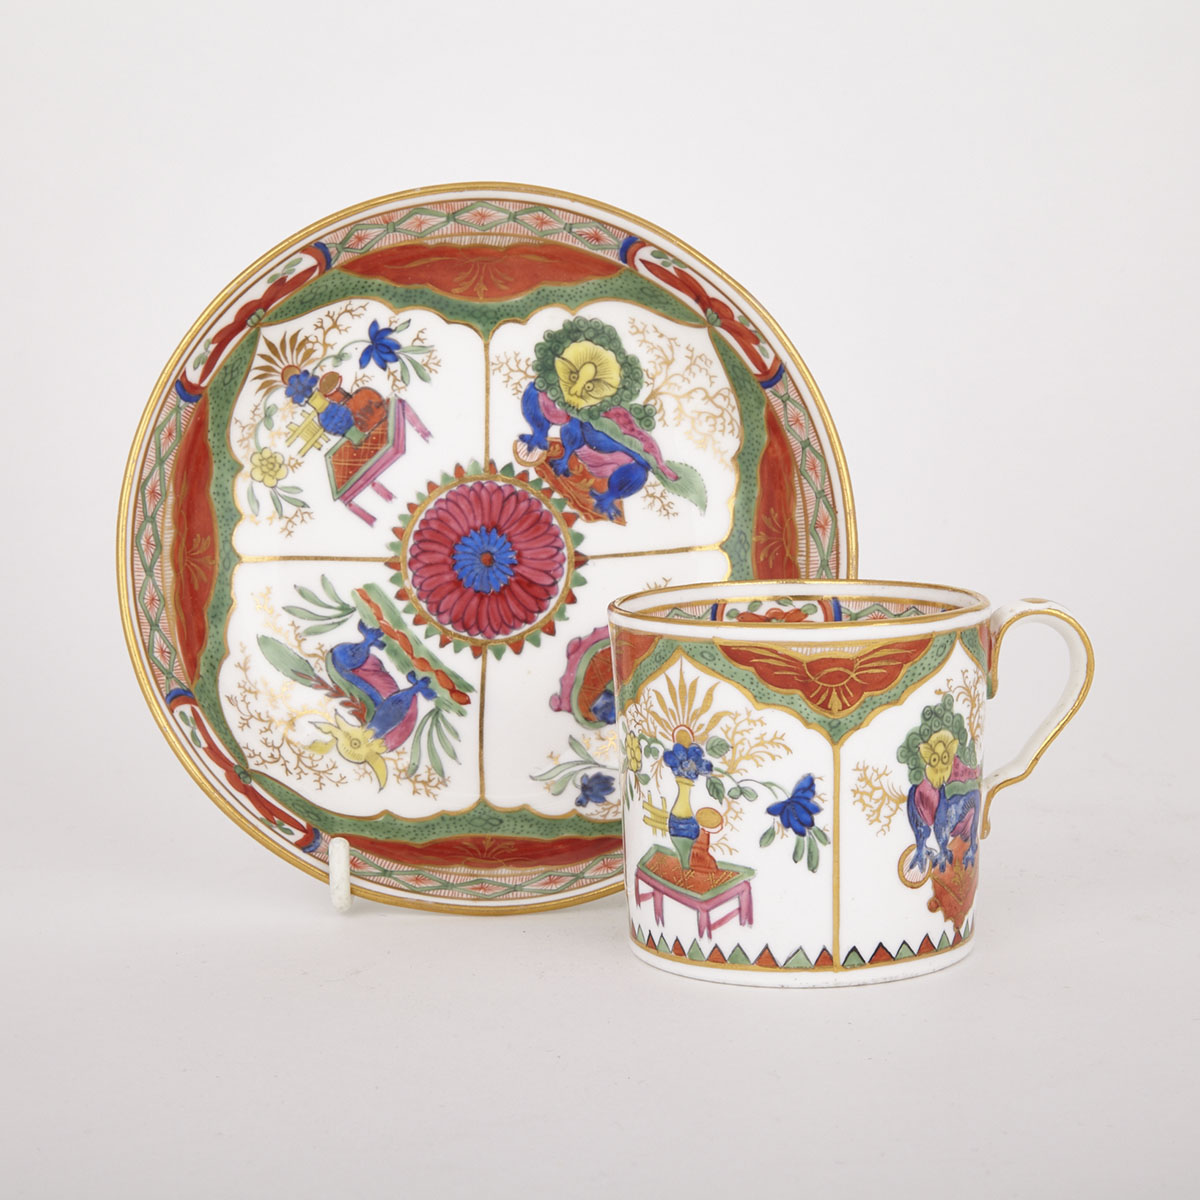 English Porcelain ‘Bengal Tiger’ or ‘Dragon in Compartments’ Pattern Coffee Cup and Saucer, probably Spode, early 19th century